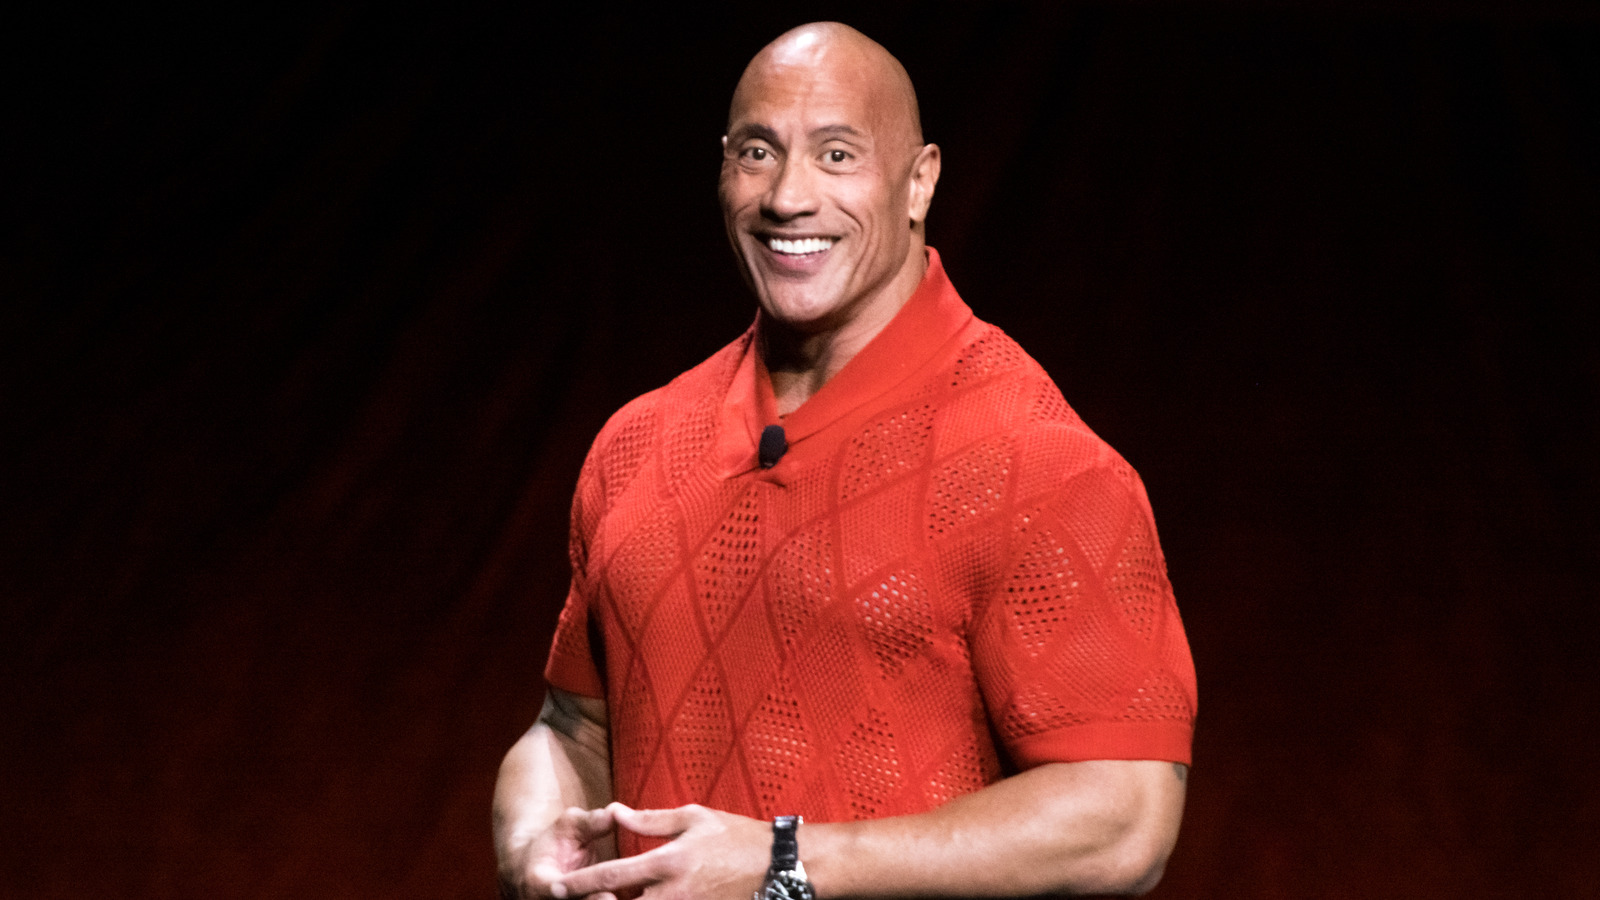 The Rock To Induct His Grandmother Lia Maivia Into WWE Hall Of Fame